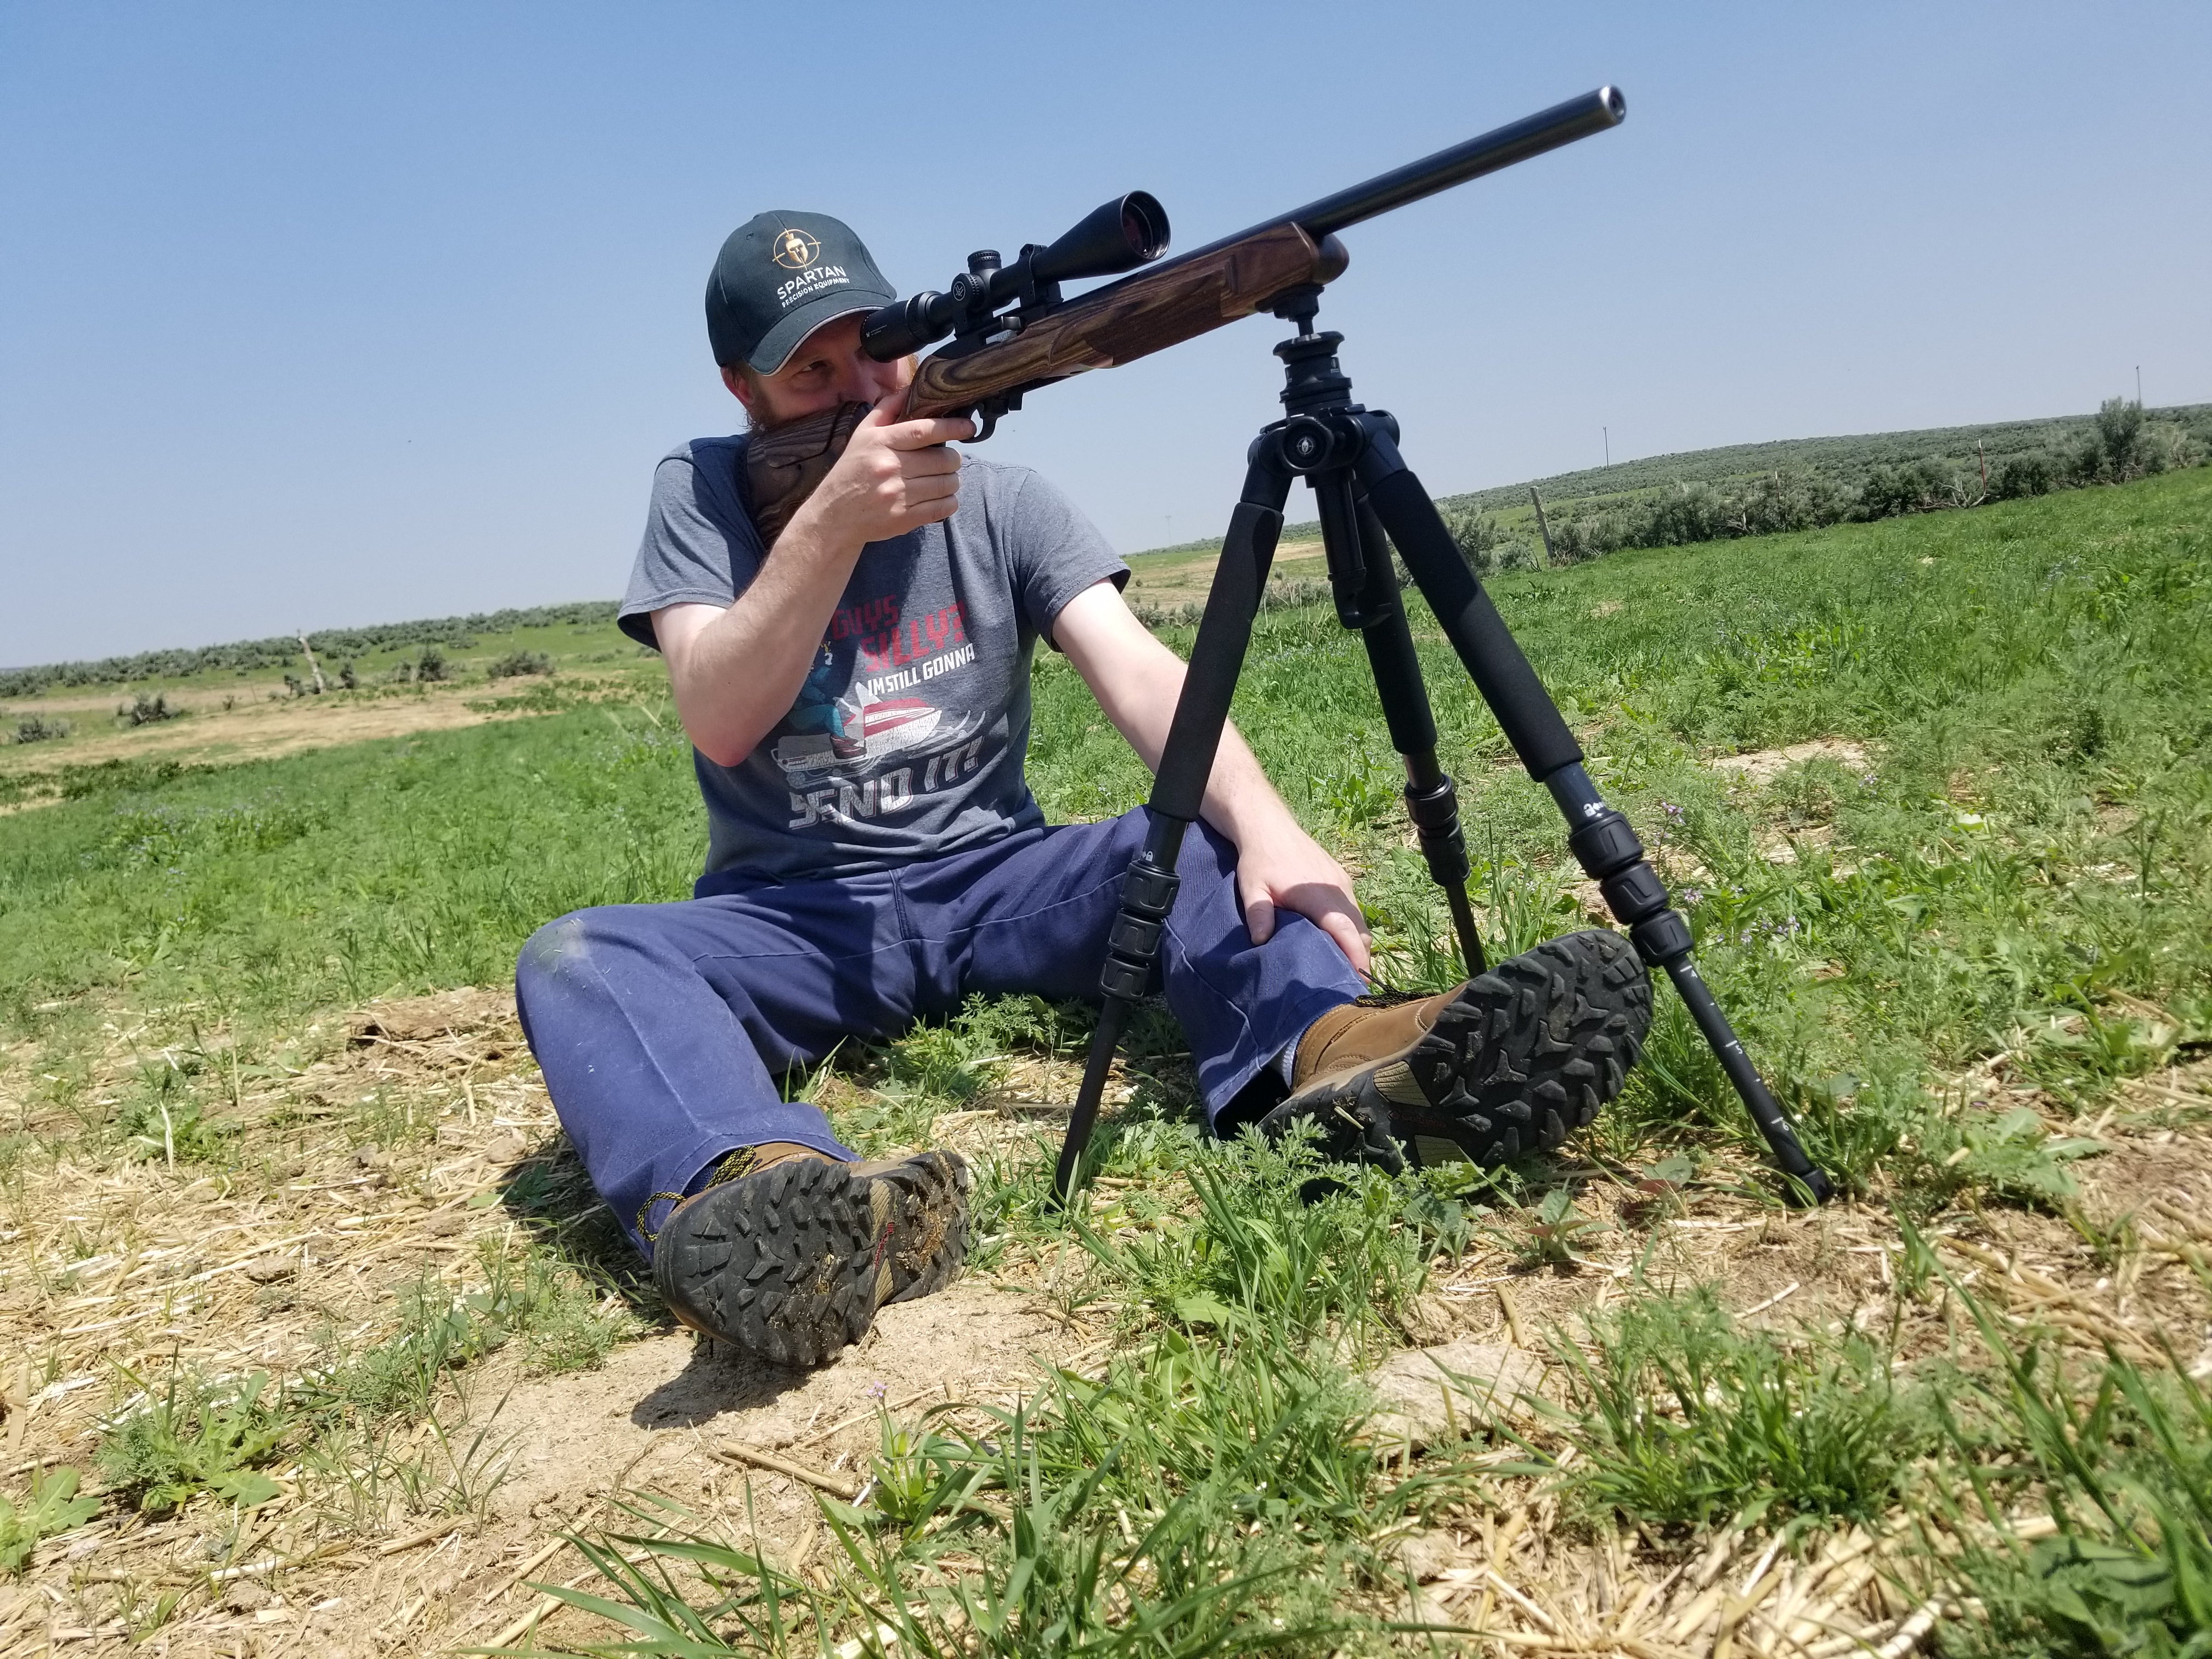 Shooter in a sitting position with the rifle mounted on an Ascent tripod